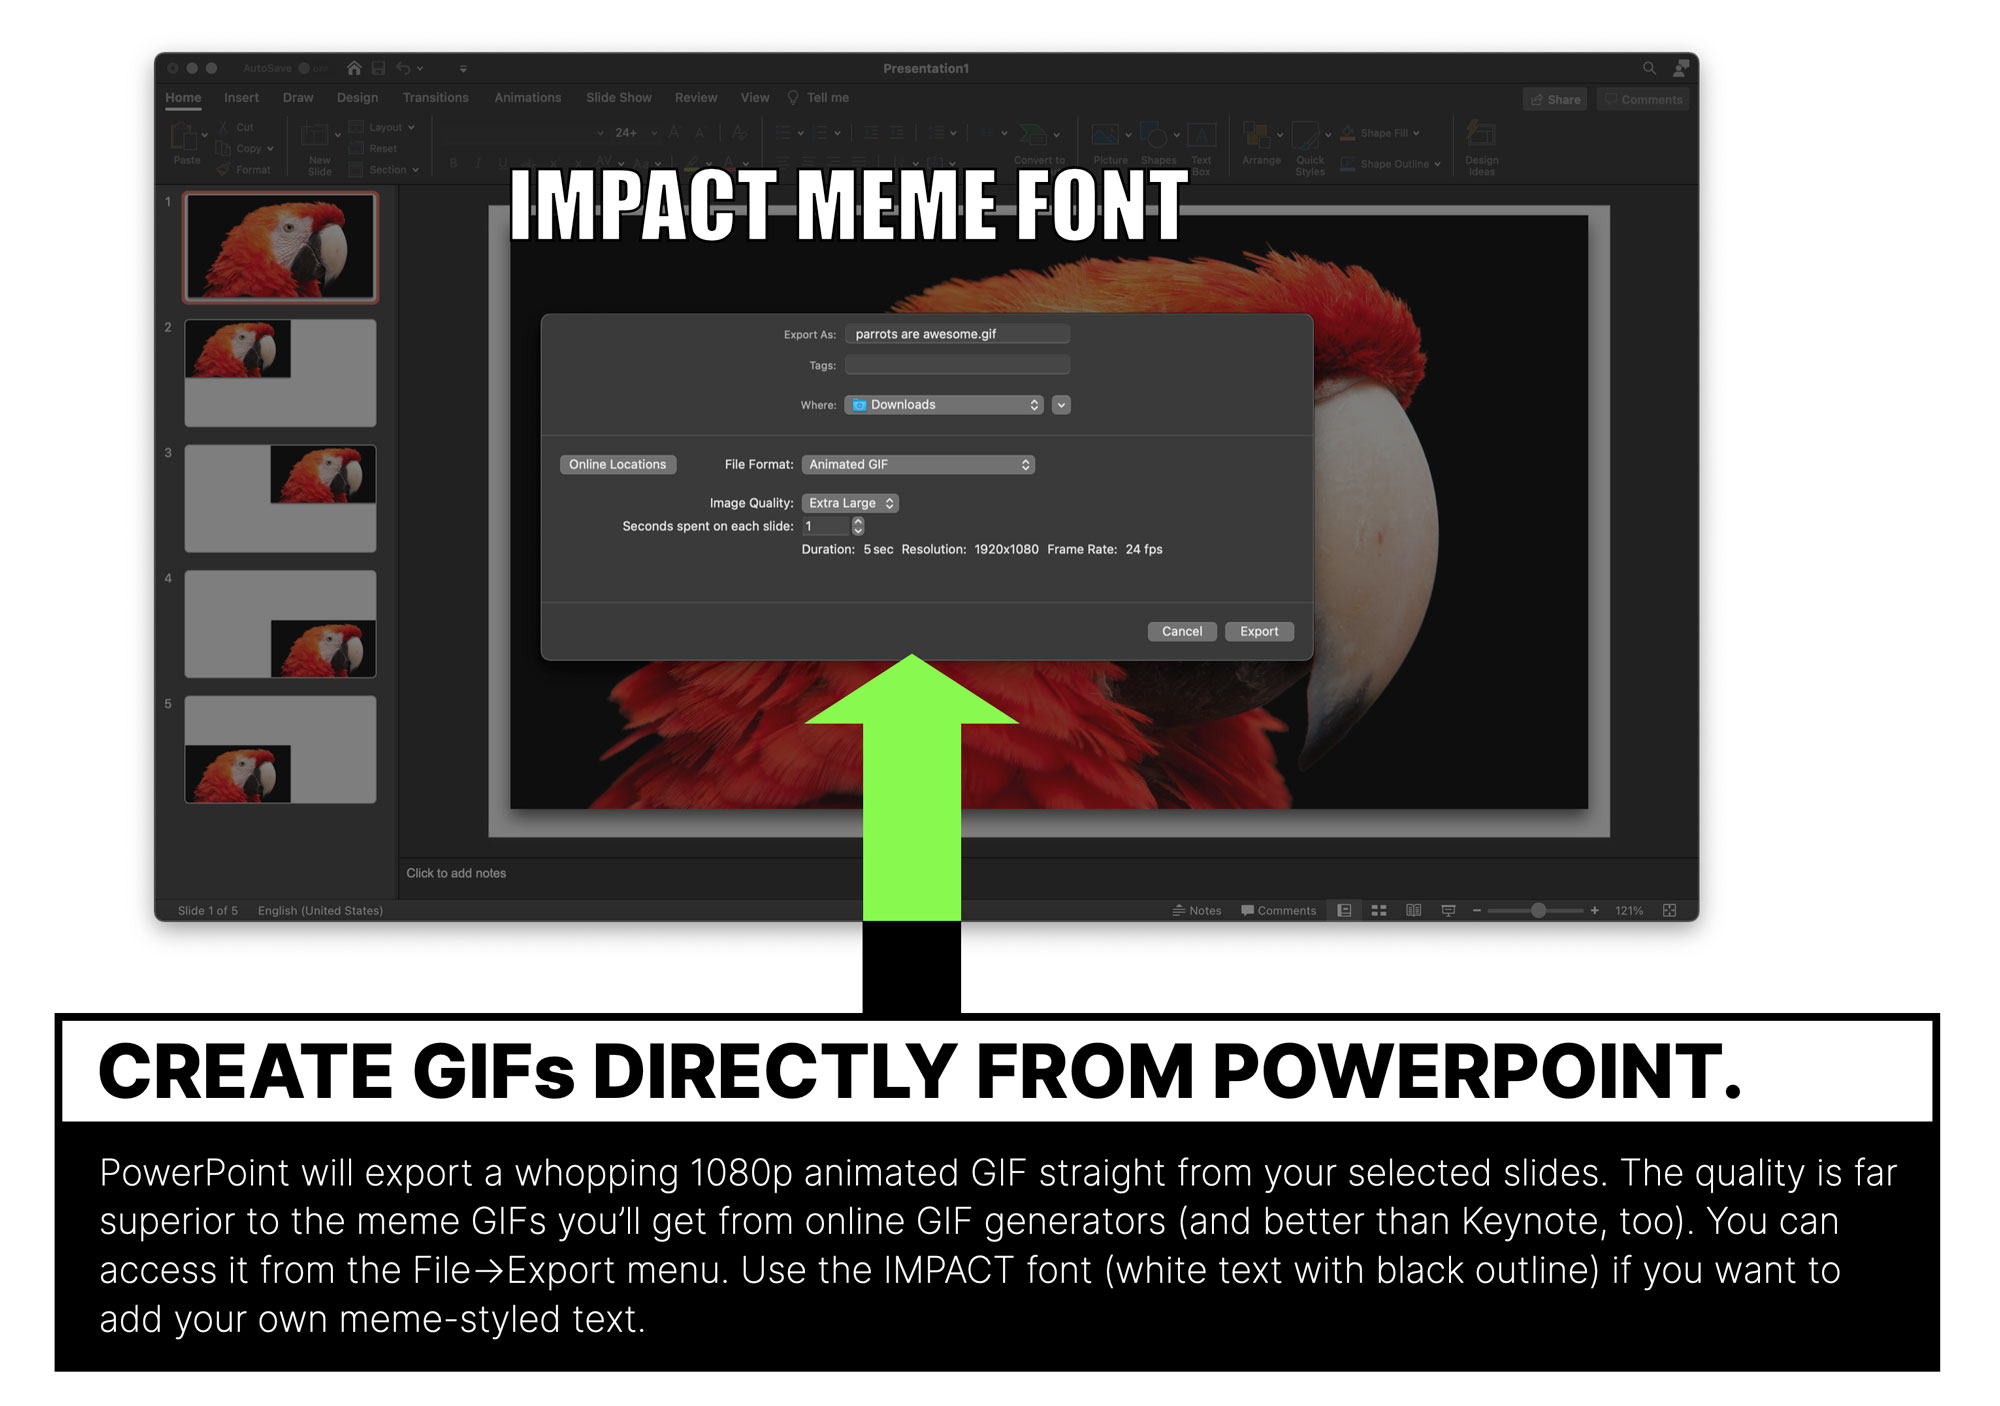 How to create animated GIFs directly inside PowerPoint